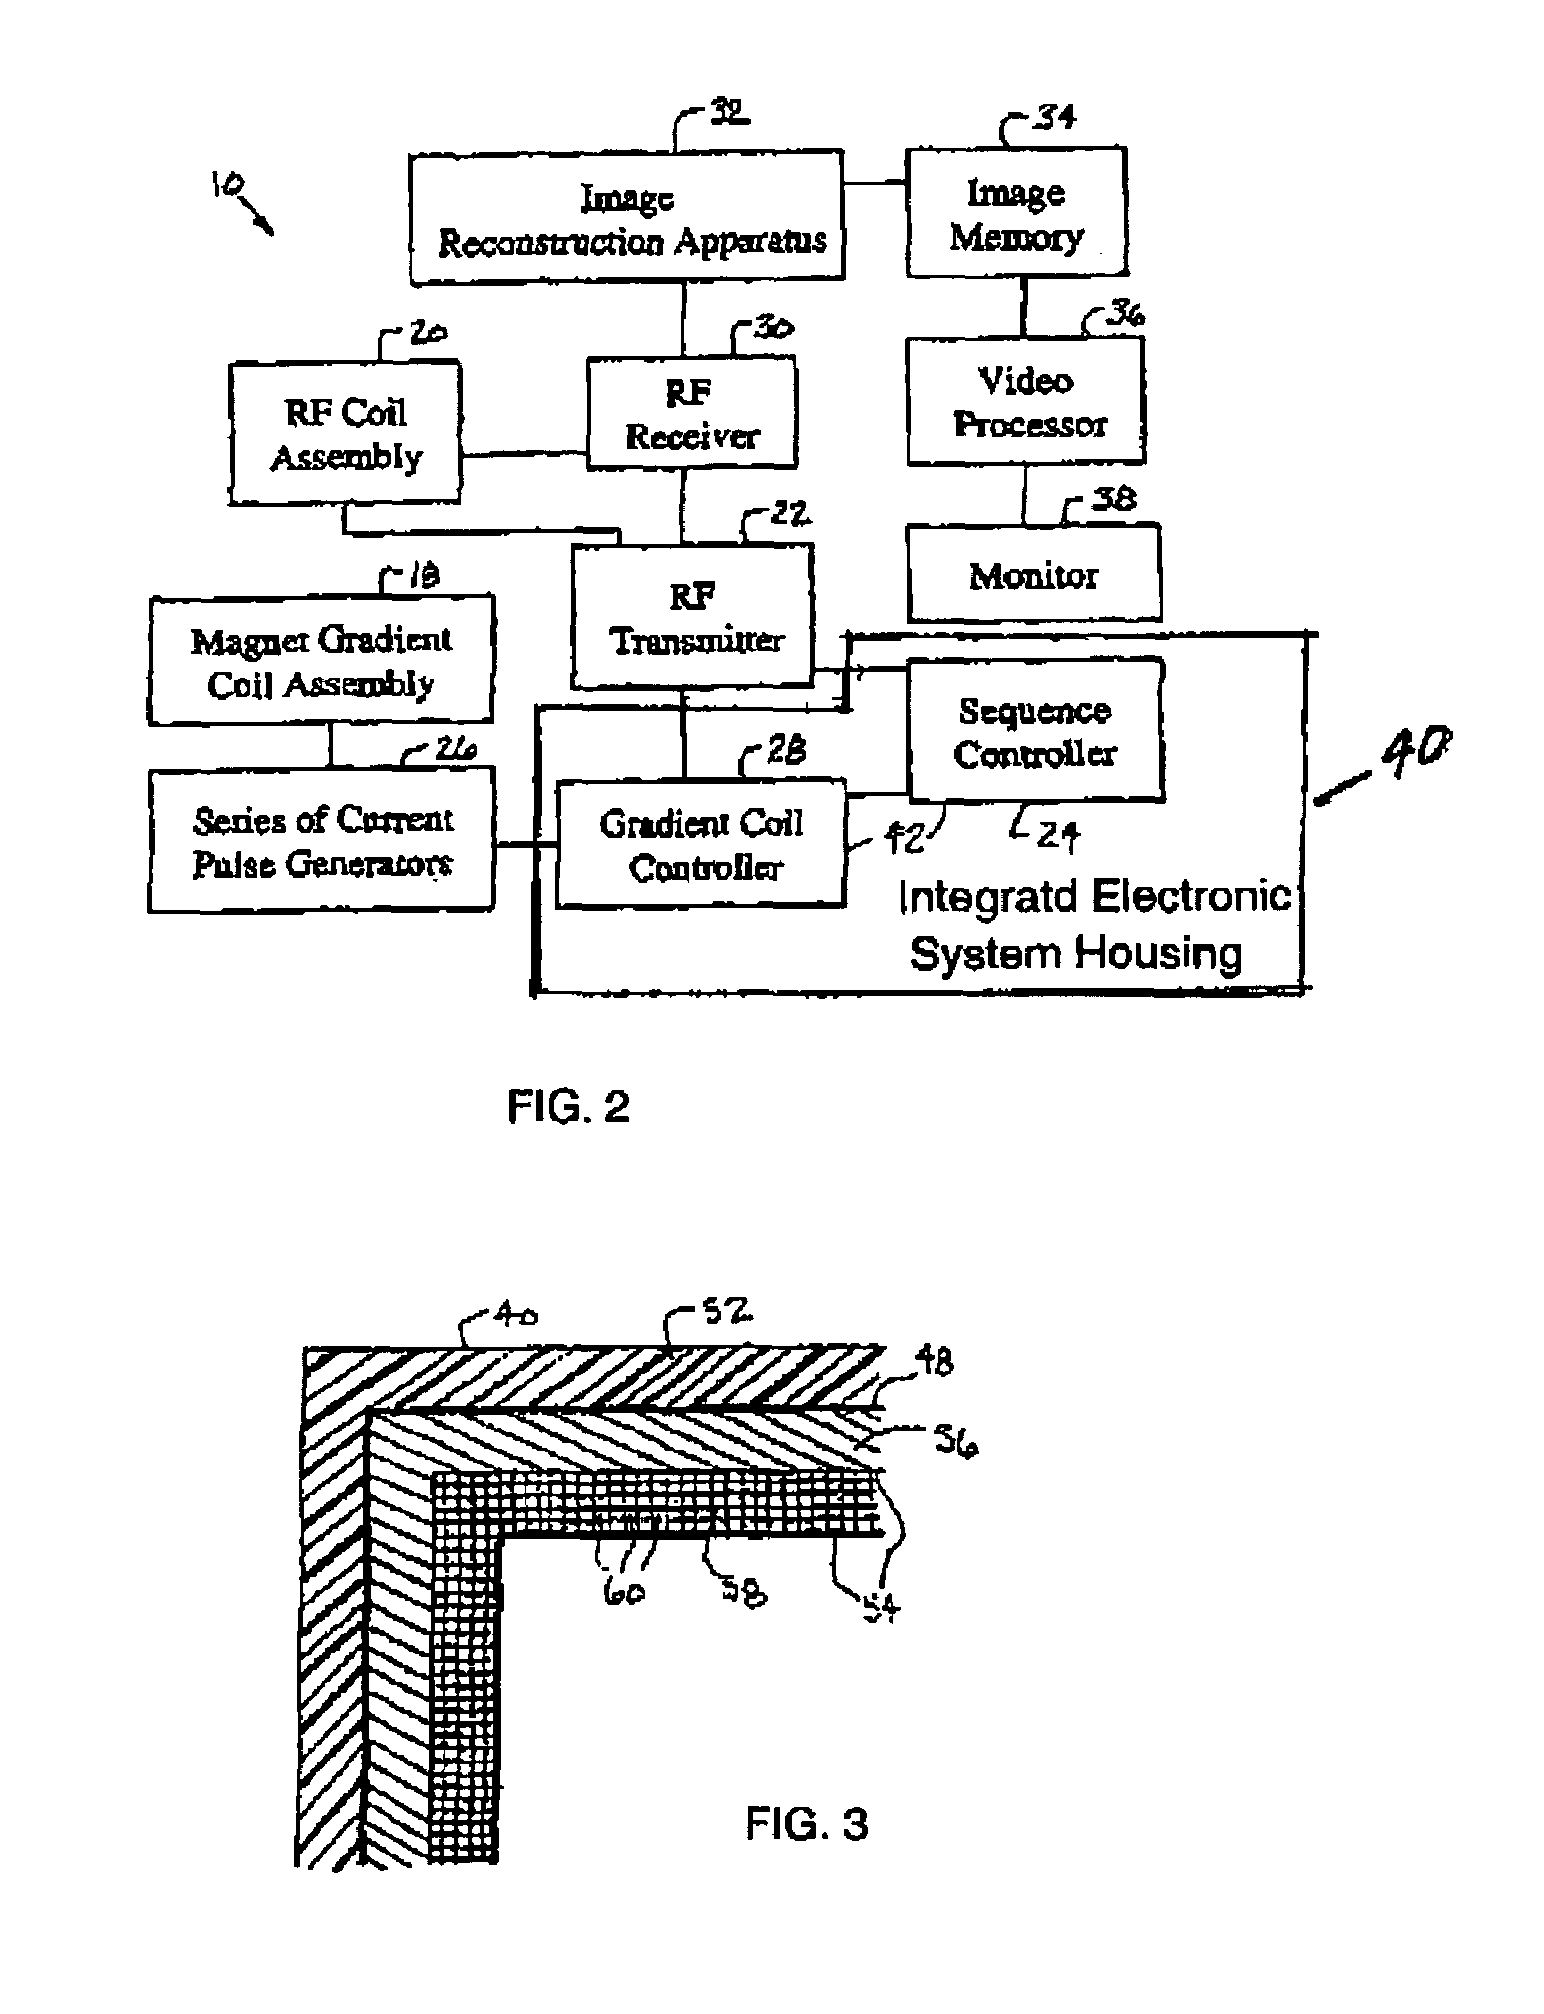 Integrated electronic RF shielding apparatus for an MRI magnet